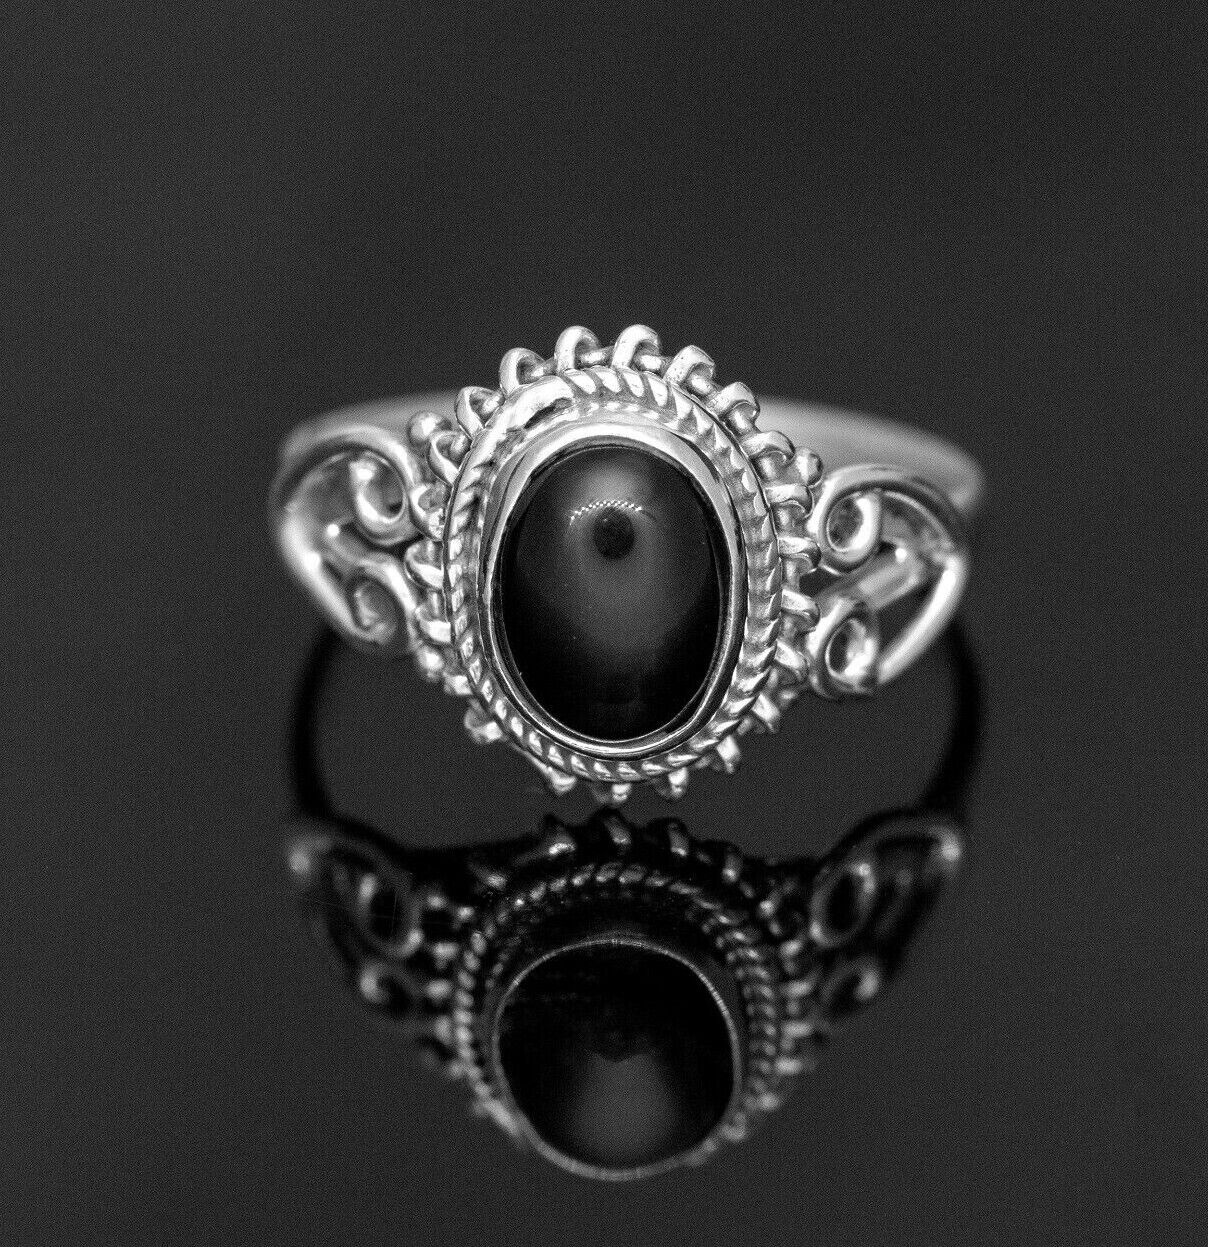 Oval Black Onyx 925 Sterling Silver Ladies Gemstone Ring Boxed Jewelry